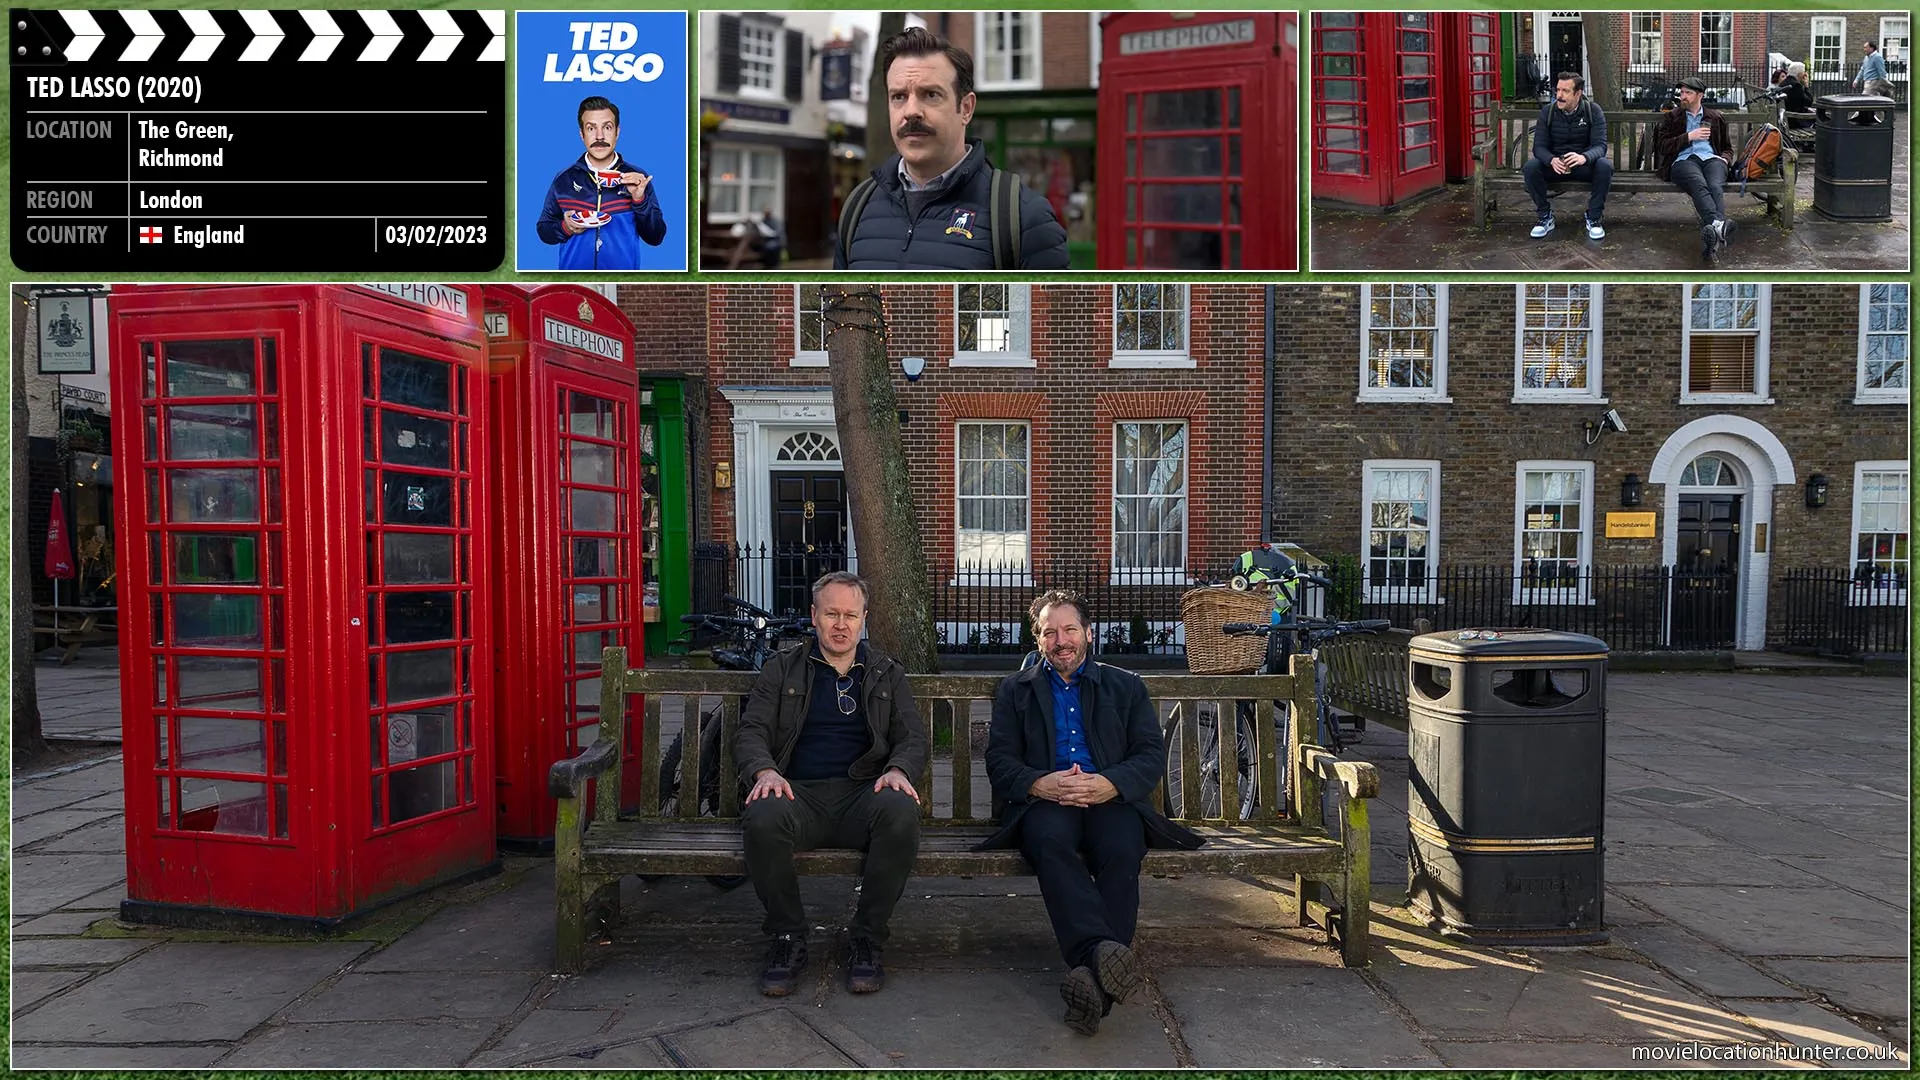 Filming location photo, shot in England, for Ted Lasso (2020). Scene description: Ted (Jason Sudeikis) leaves his apartment, and the locals are reading the sports headlines and glaring at him as he walks by.  He stands exasperated when he suddenly hears the reassuring voice of Coach Beard (Brendan Hunt) sitting on a bench with two coffees.